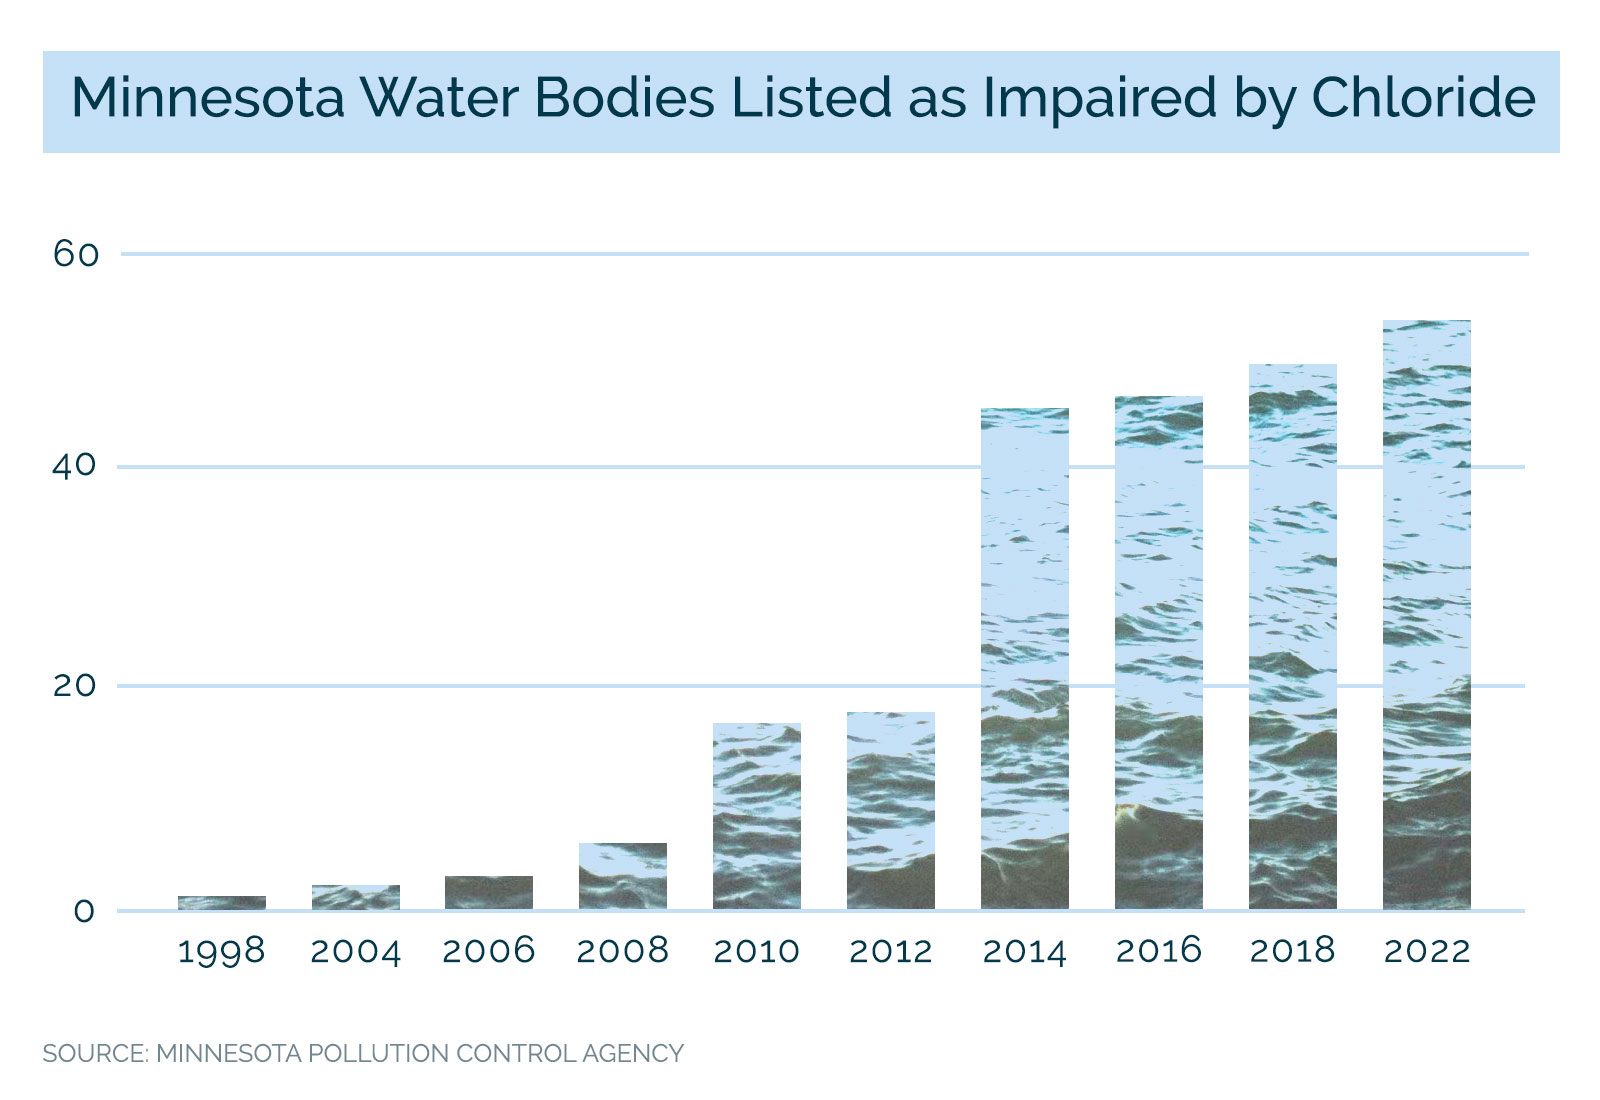 bar graph with water overlay showing Minnesota water bodies impaired by chloride from 1998 to 2022